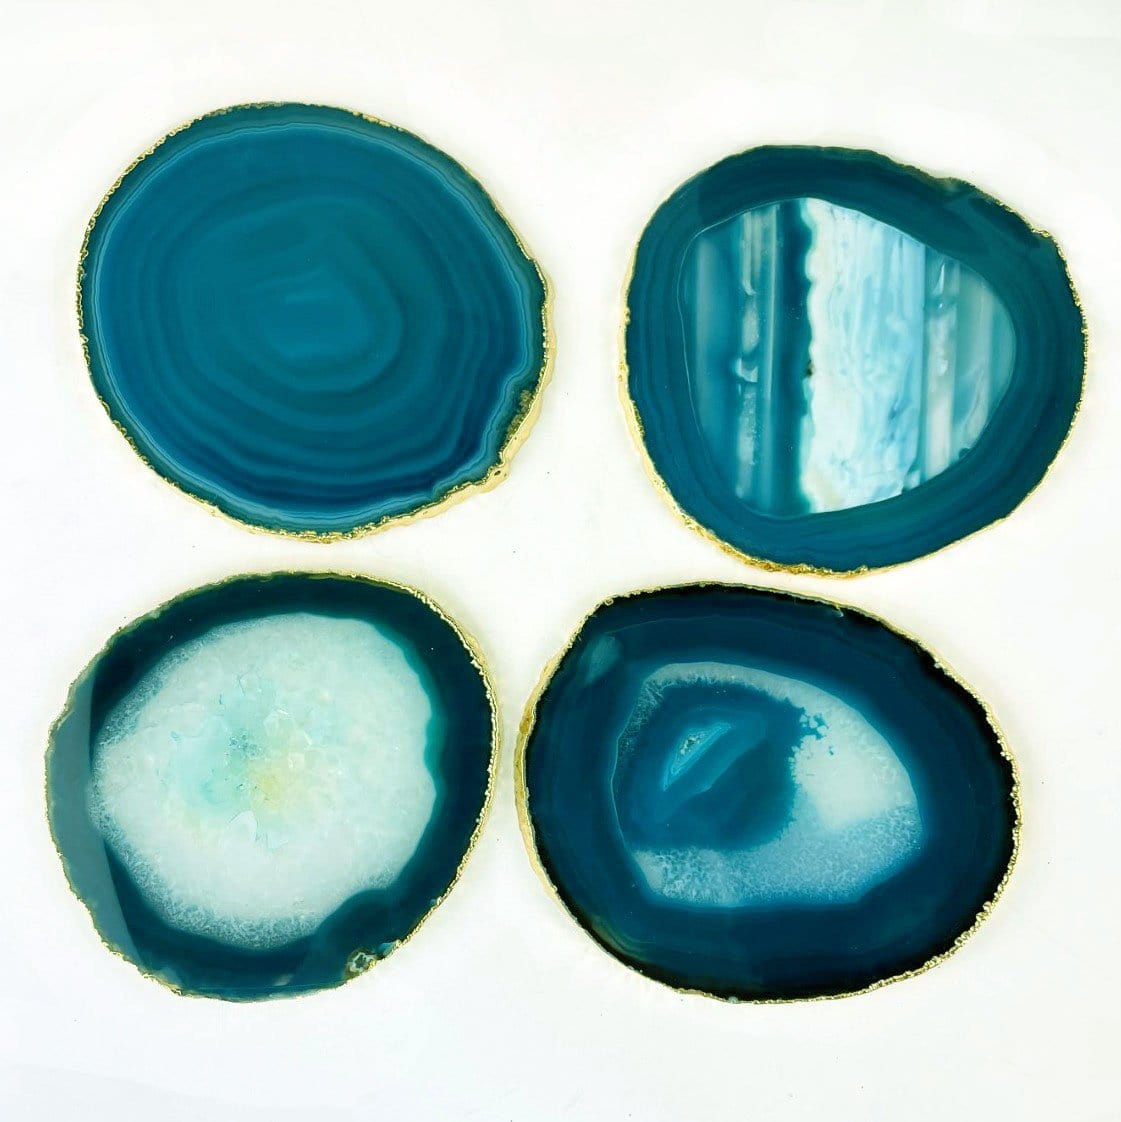 4 Teal Agate coasters with a gold electroplated edge Slices measure about 3.5-5"